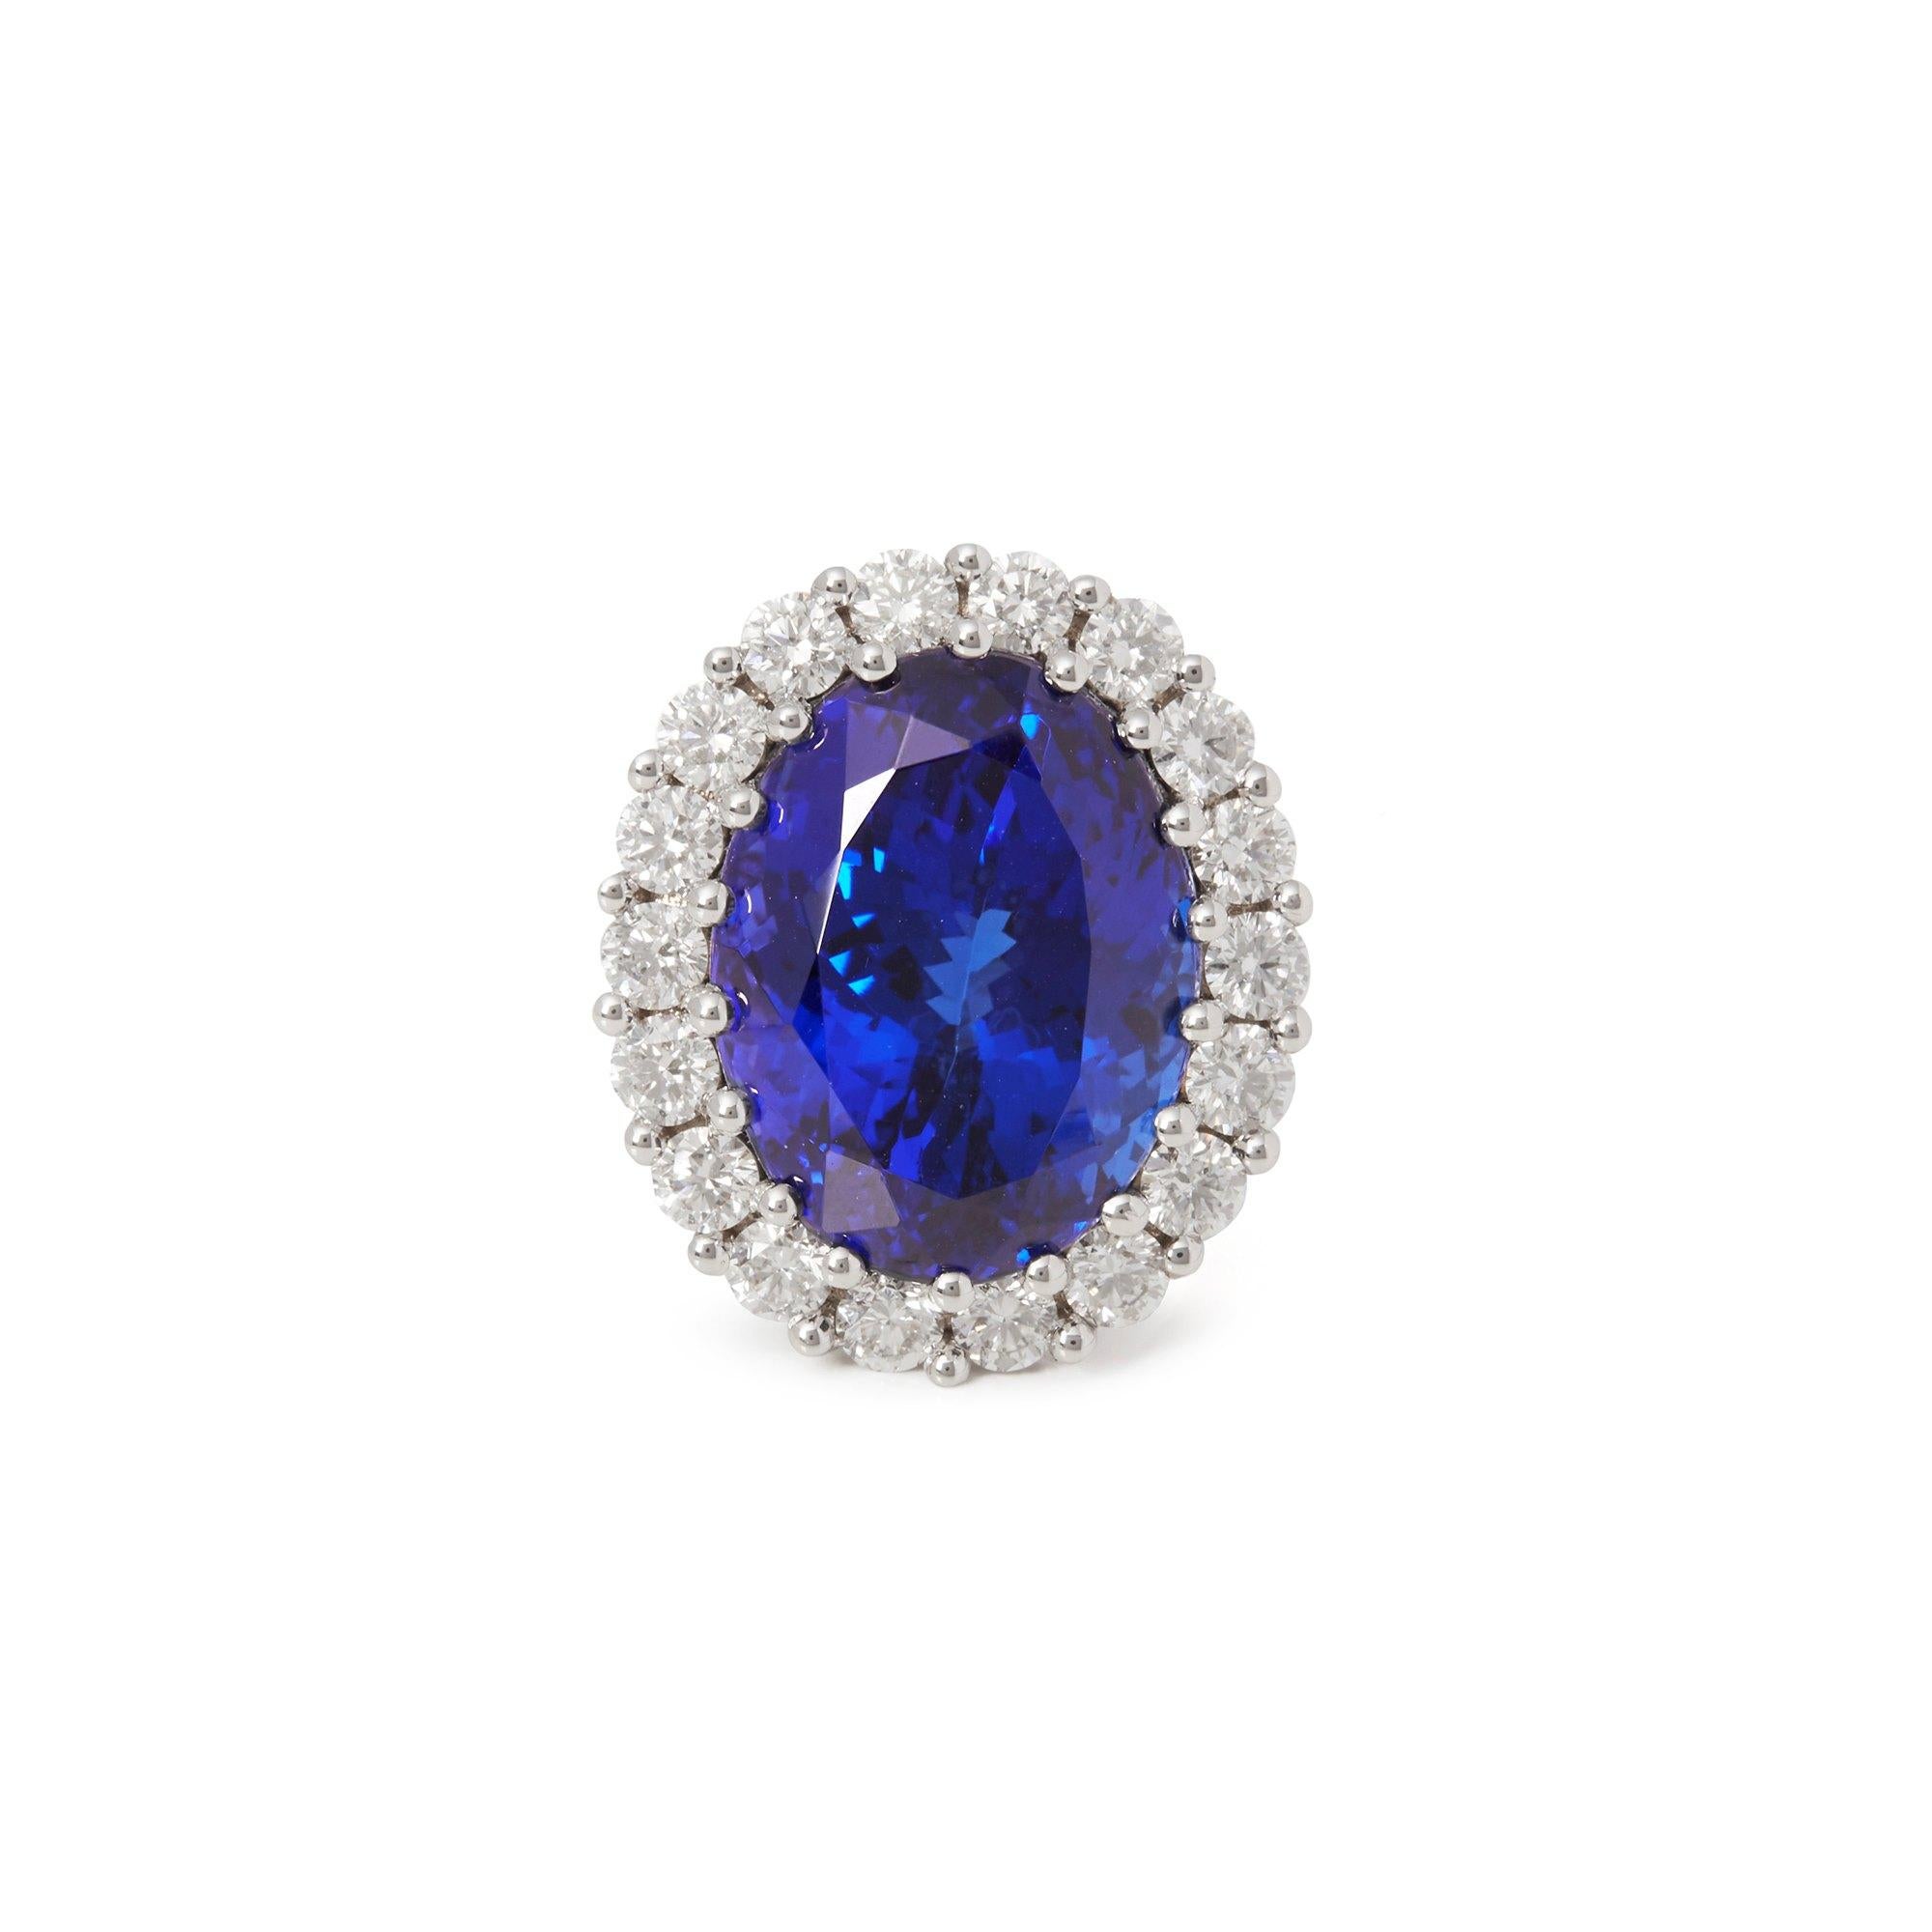 This ring designed by David Jerome is from his private collection and features one oval cut Tanzanite totalling 19.89cts sourced in the D block mine Tanzania. Set with round brilliant cut Diamonds totalling 2.94cts mounted in an 18k white gold